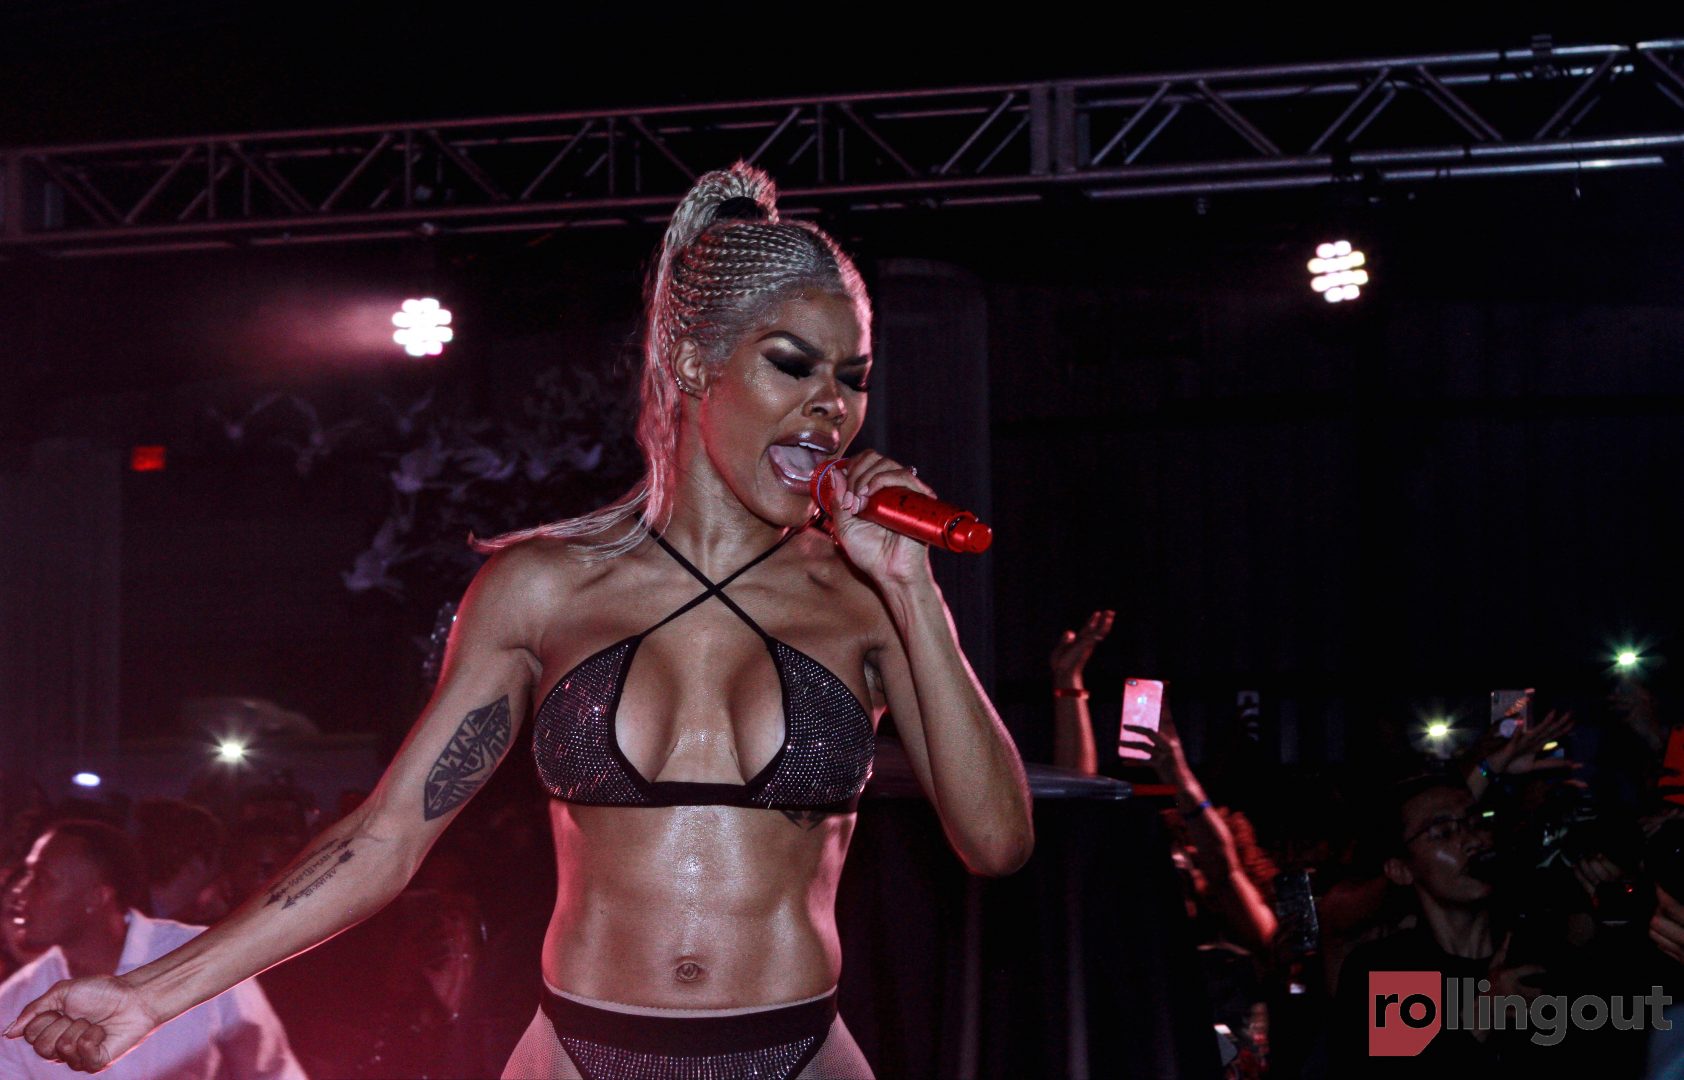 Feeling 'underappreciated,' Teyana Taylor retires from the music industry